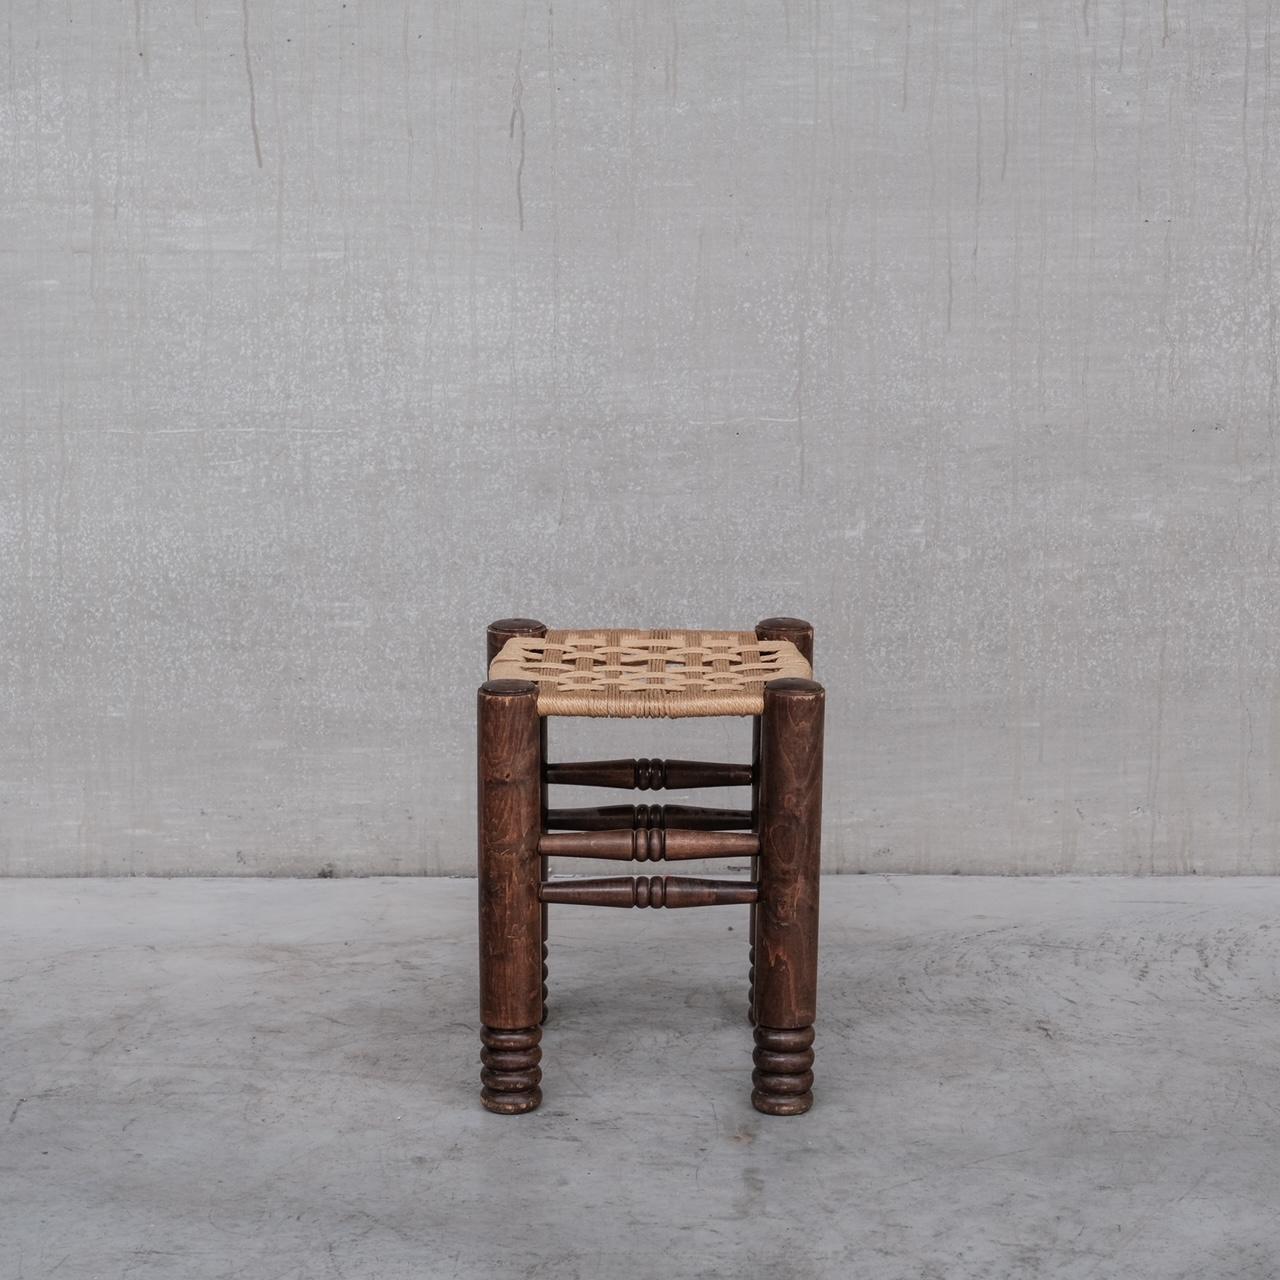 A single mid-20th stool. 

France, c1940s. 

Oak and cord. 

Good condition, some wear and scuffs commensurate with age. 

Location: Belgium Gallery. 

Dimensions: 44 H x 35 W x 35 D in cm. 

Delivery: POA

We can ship around the